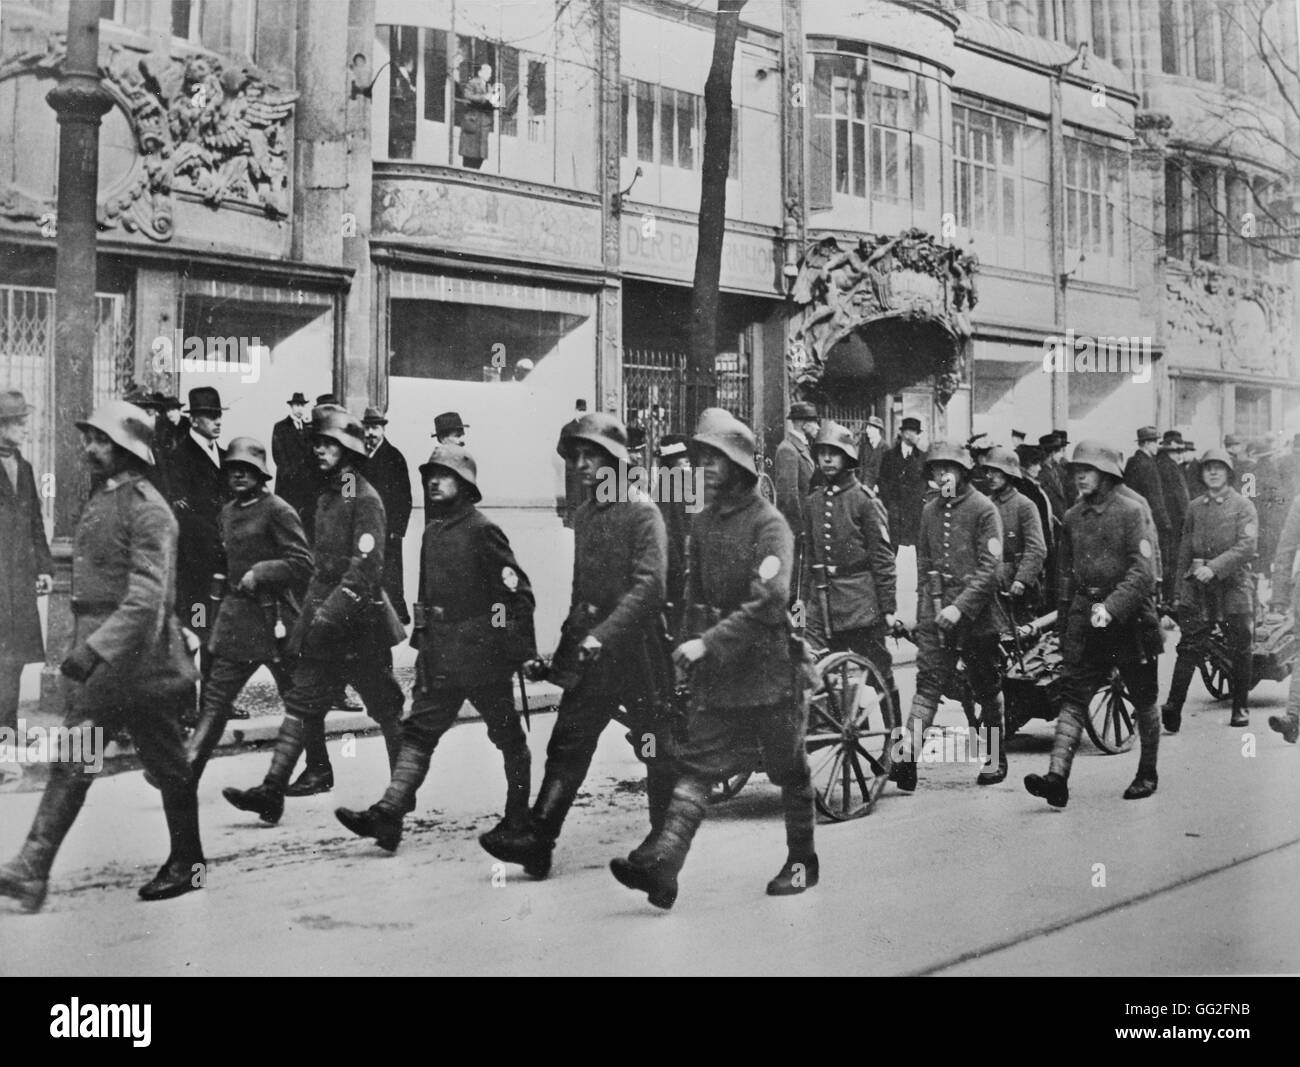 First World War Defection of German marines in Berlin a few days before the November armistice in 1918. The crews of the battleships at Hambourg and Kiel refused to obey their leaders. Civilians and the territorial army joined them. This revolt marked the Stock Photo